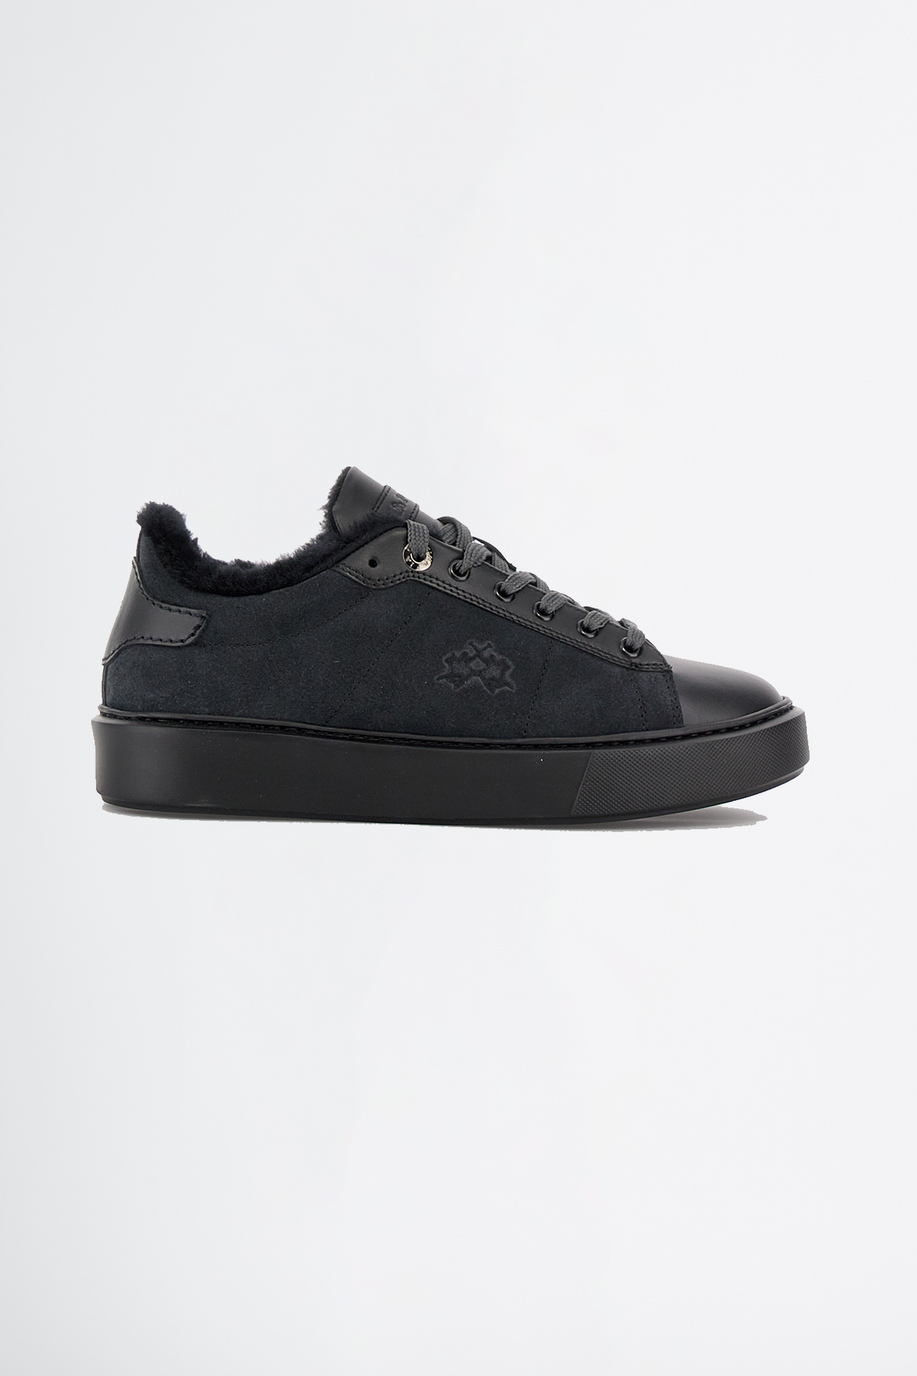 Women's trainers with inner lining - Woman shoes | La Martina - Official Online Shop